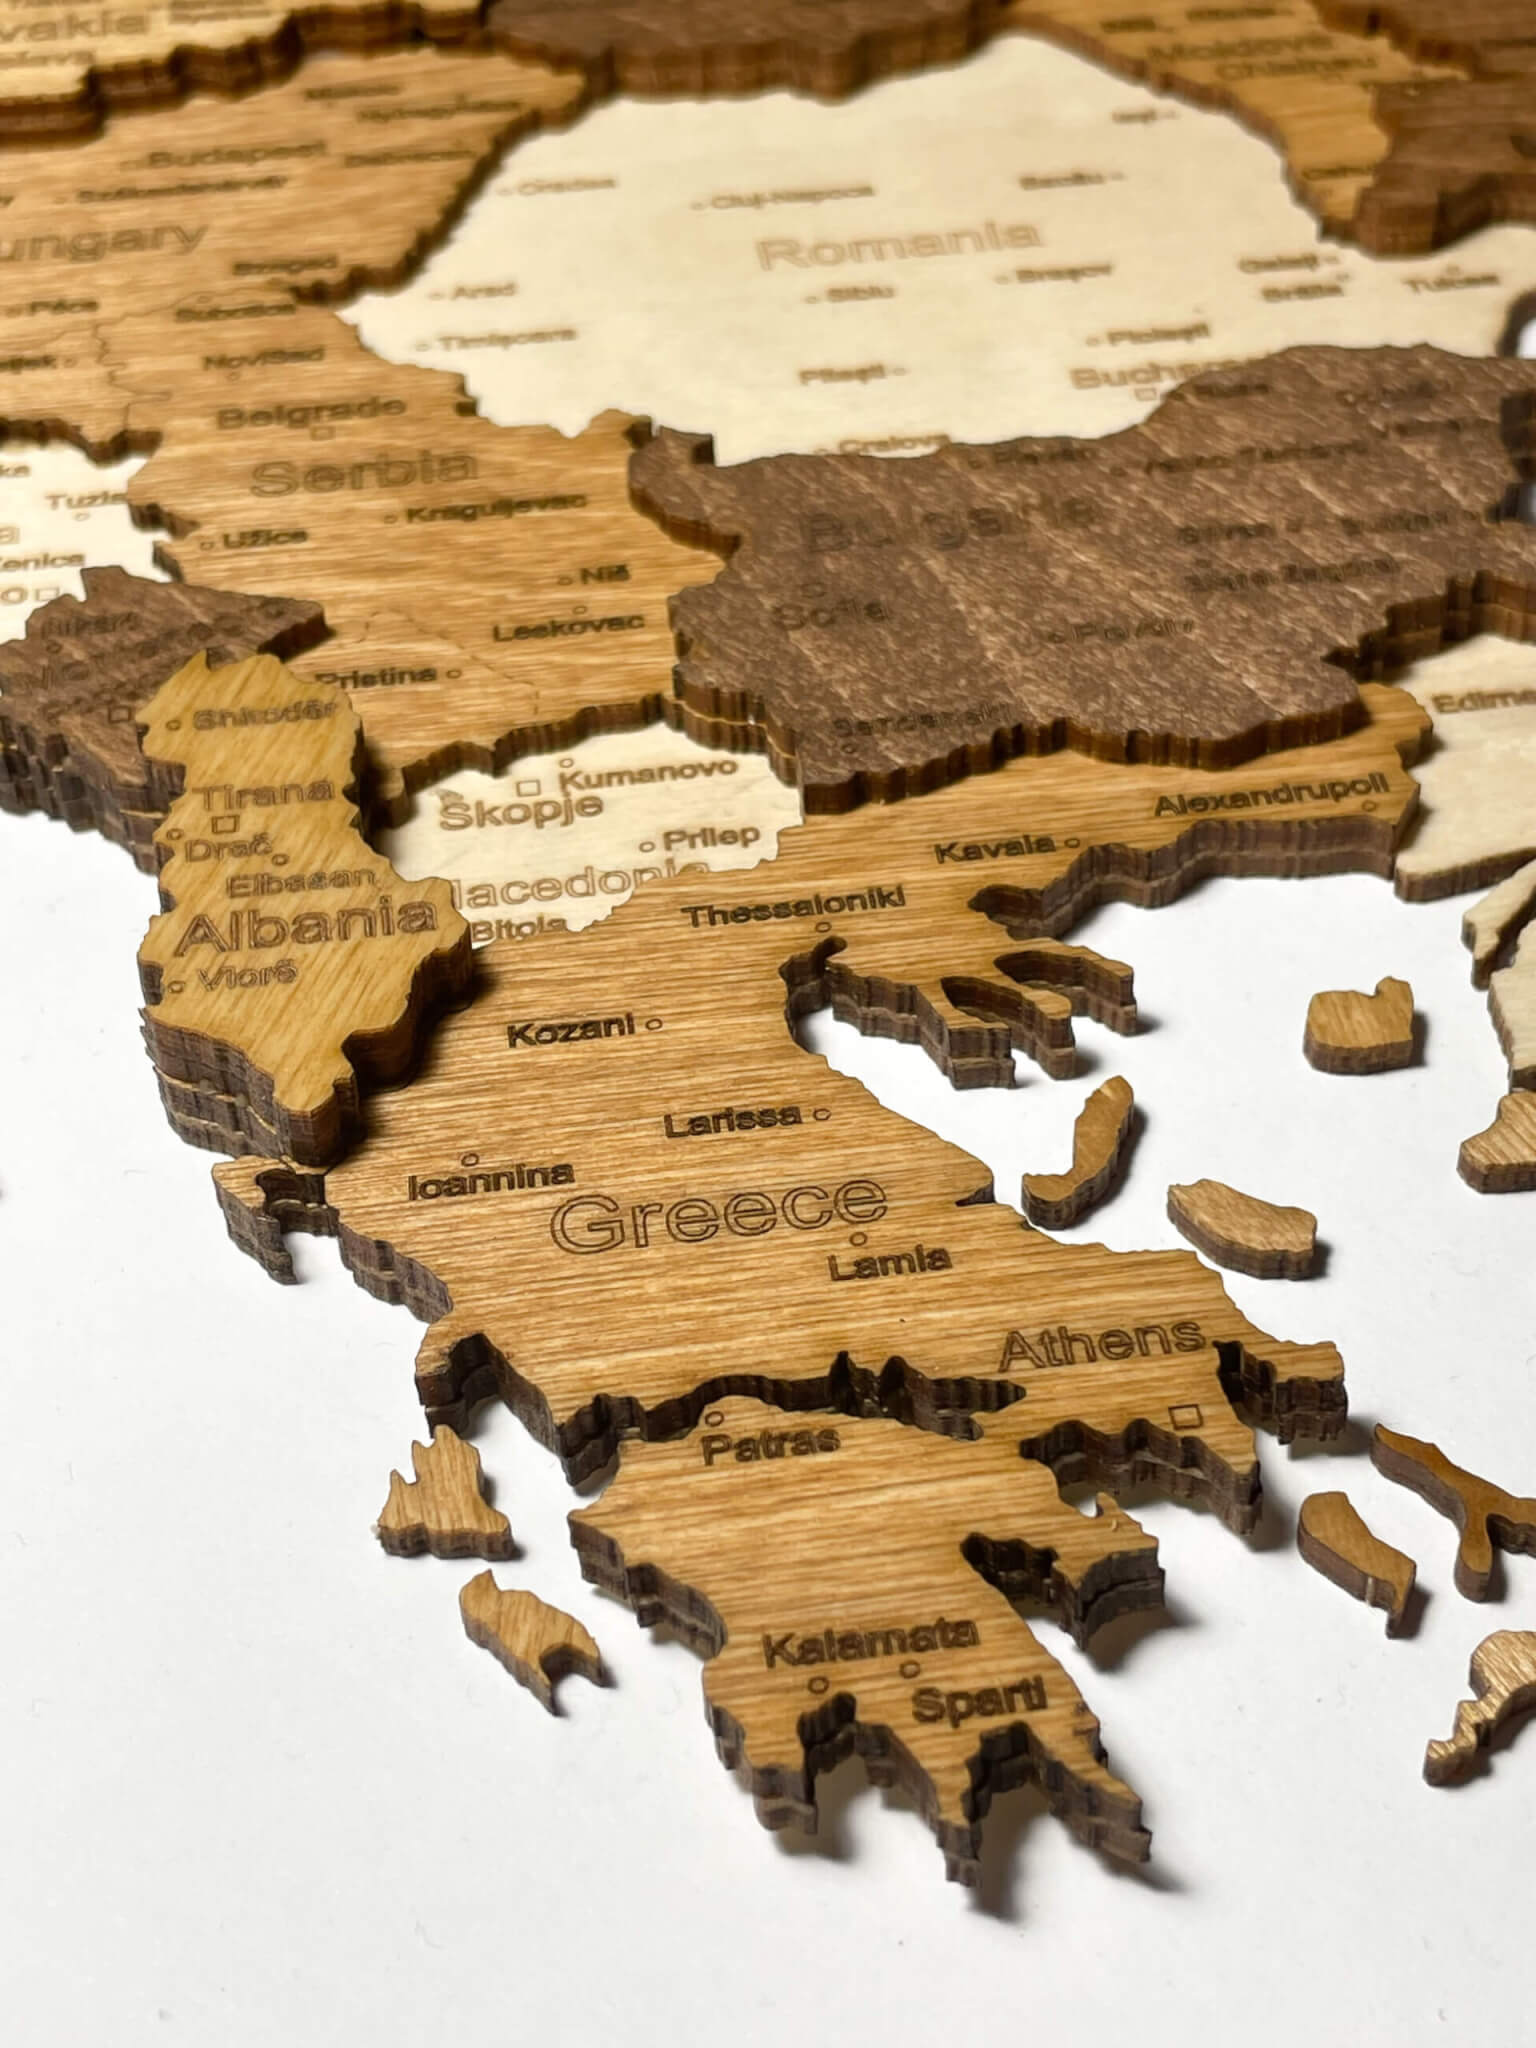 Greece - Wooden Map of Europe